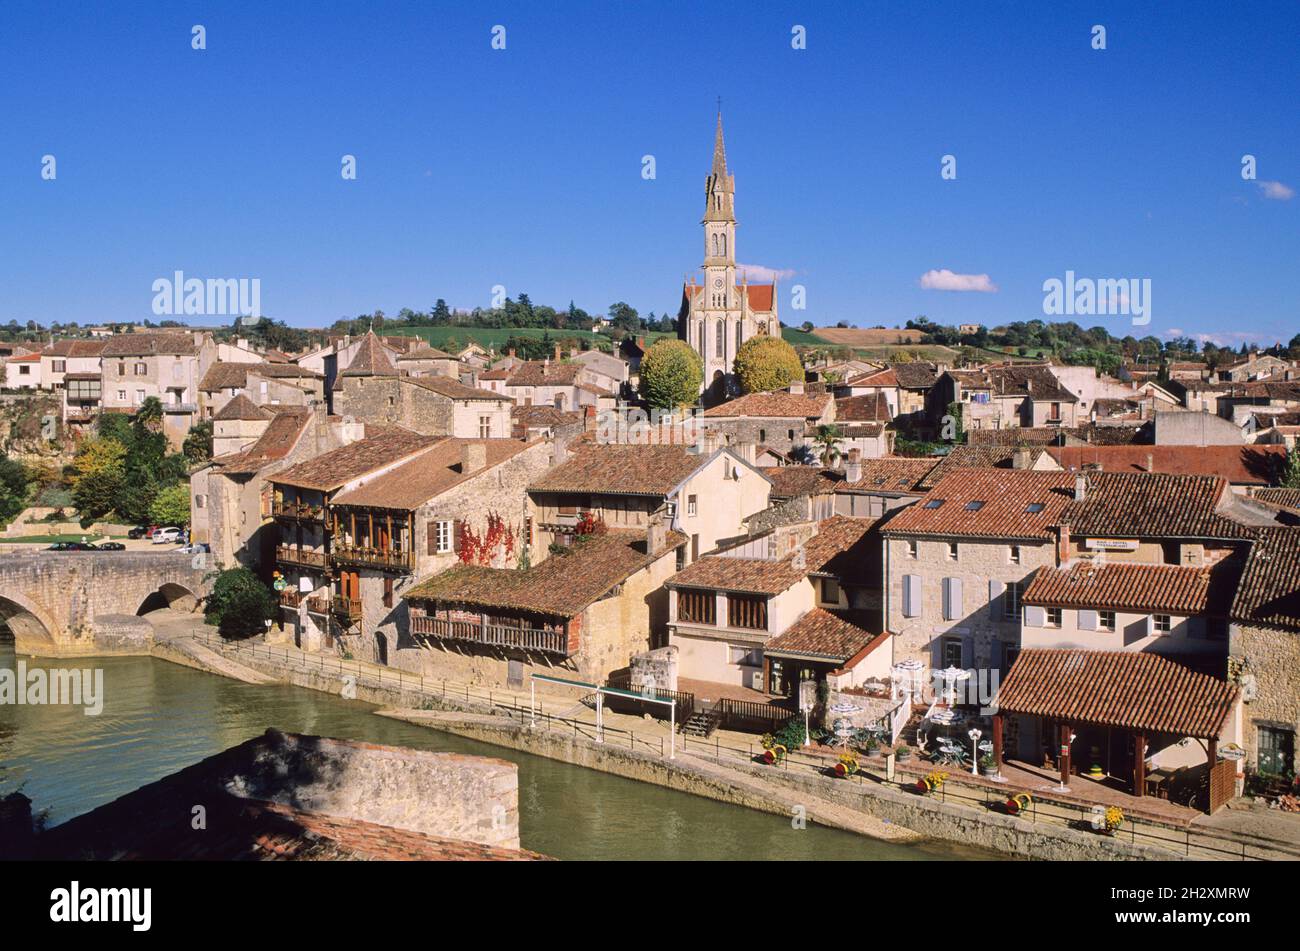 FRANCE. LOT-ET-GARONNE (47) THE MEDIEVAL CITY OF NERAC WITH THE CHATEAU OF KING HENRY 4TH, AND THE GOTHIC PONT VIEUX Stock Photo